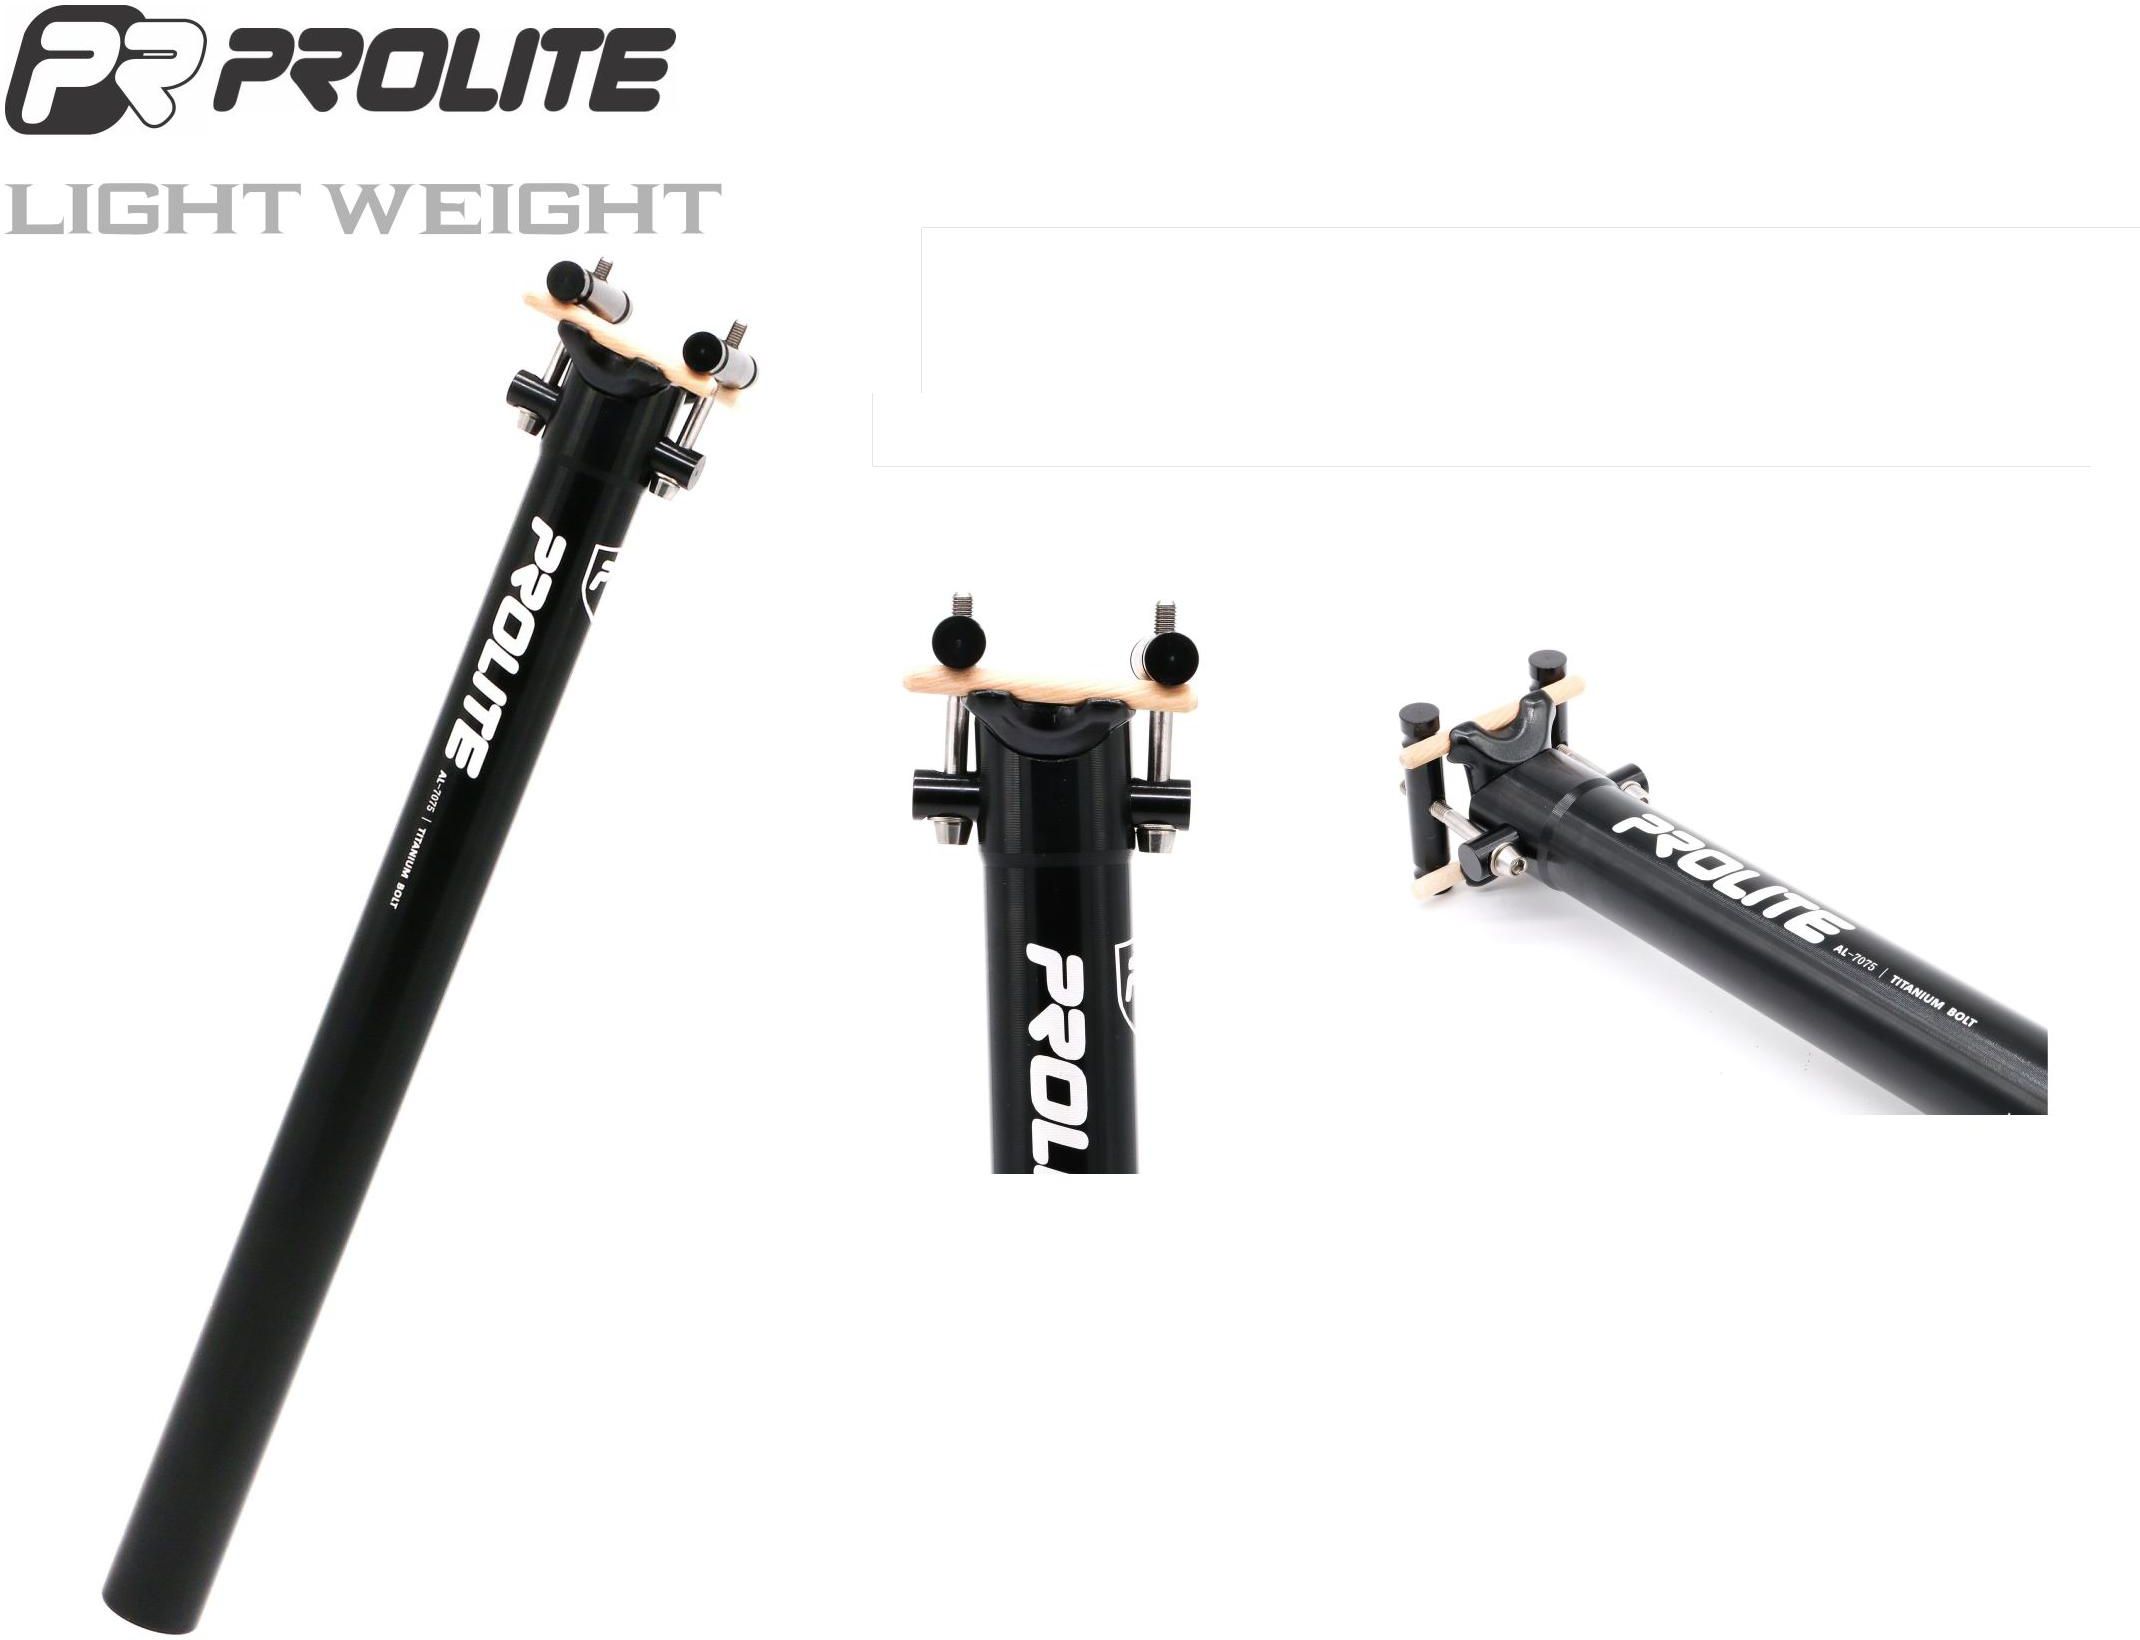 Prolite Bicycle Alloy Seat Post Light Weight (Black)